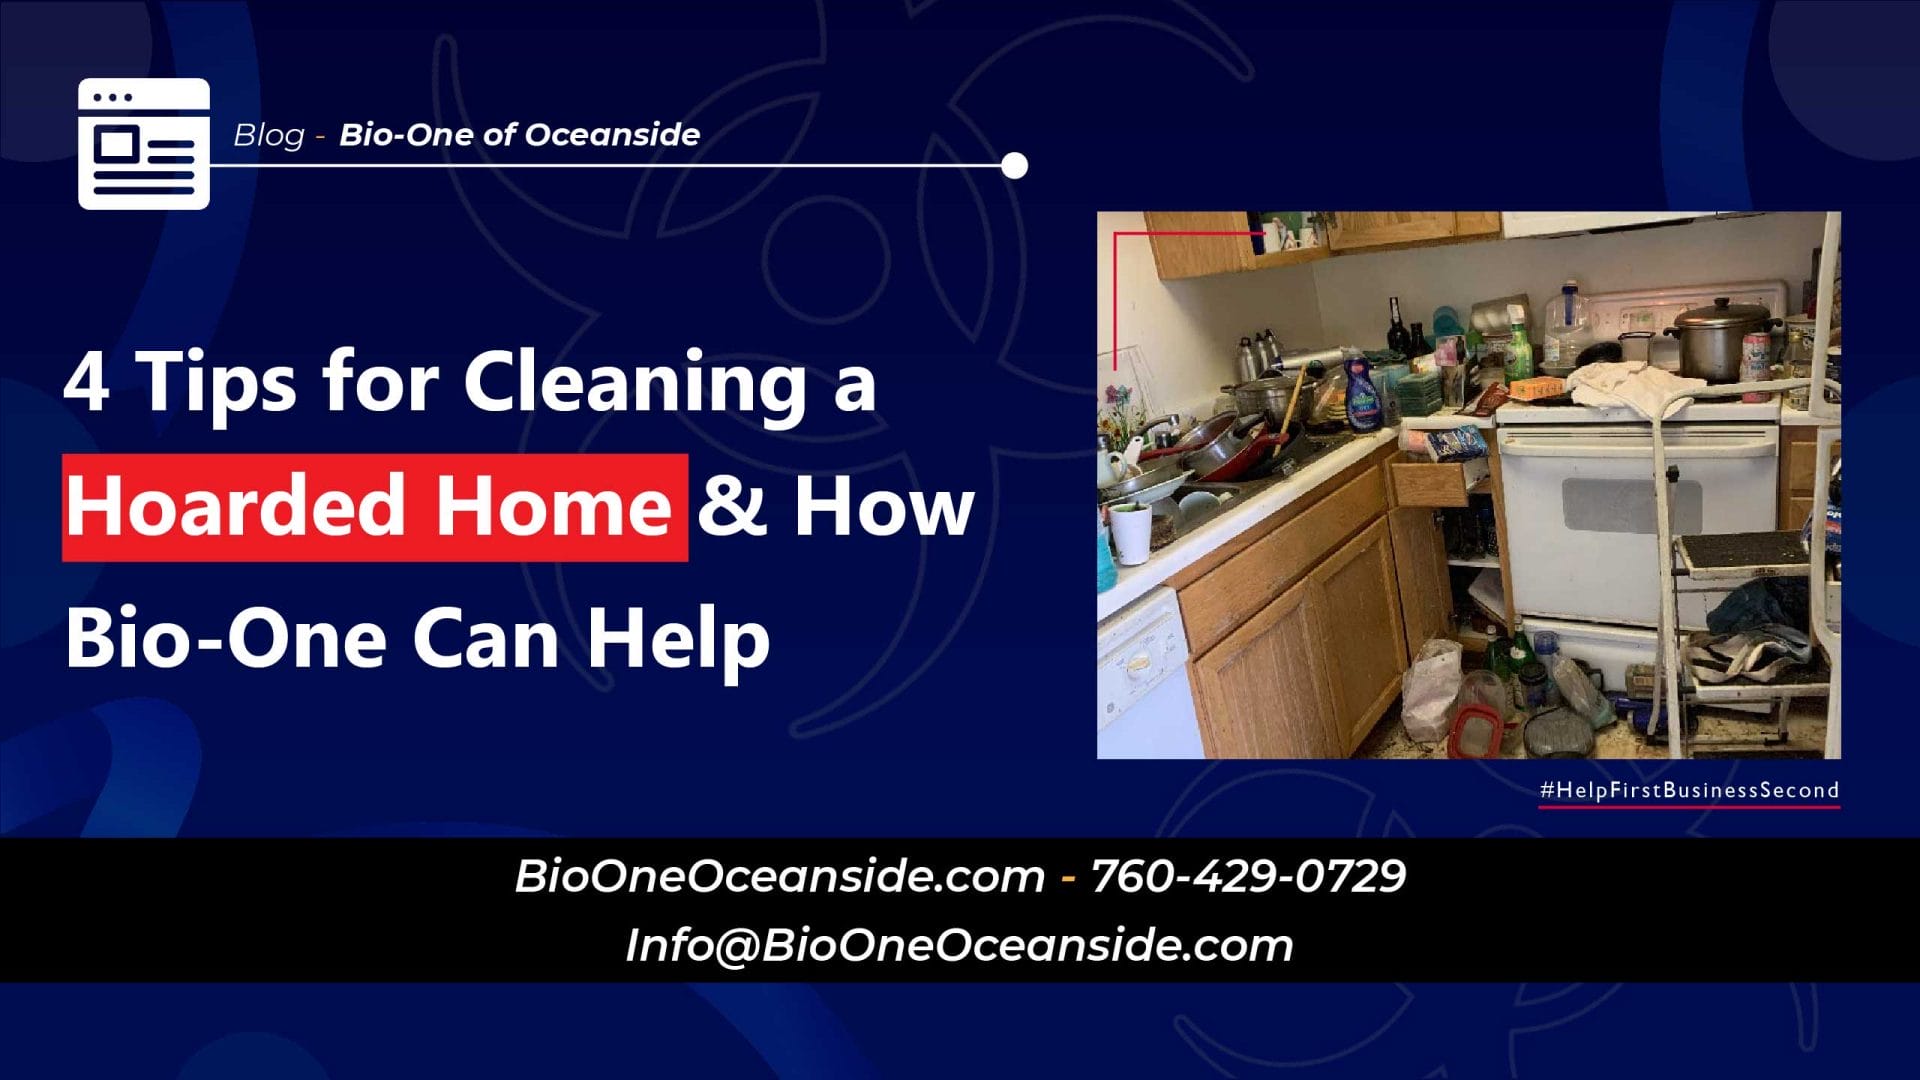 4 Tips for Cleaning a Hoarded Home & How Bio-One Can Help